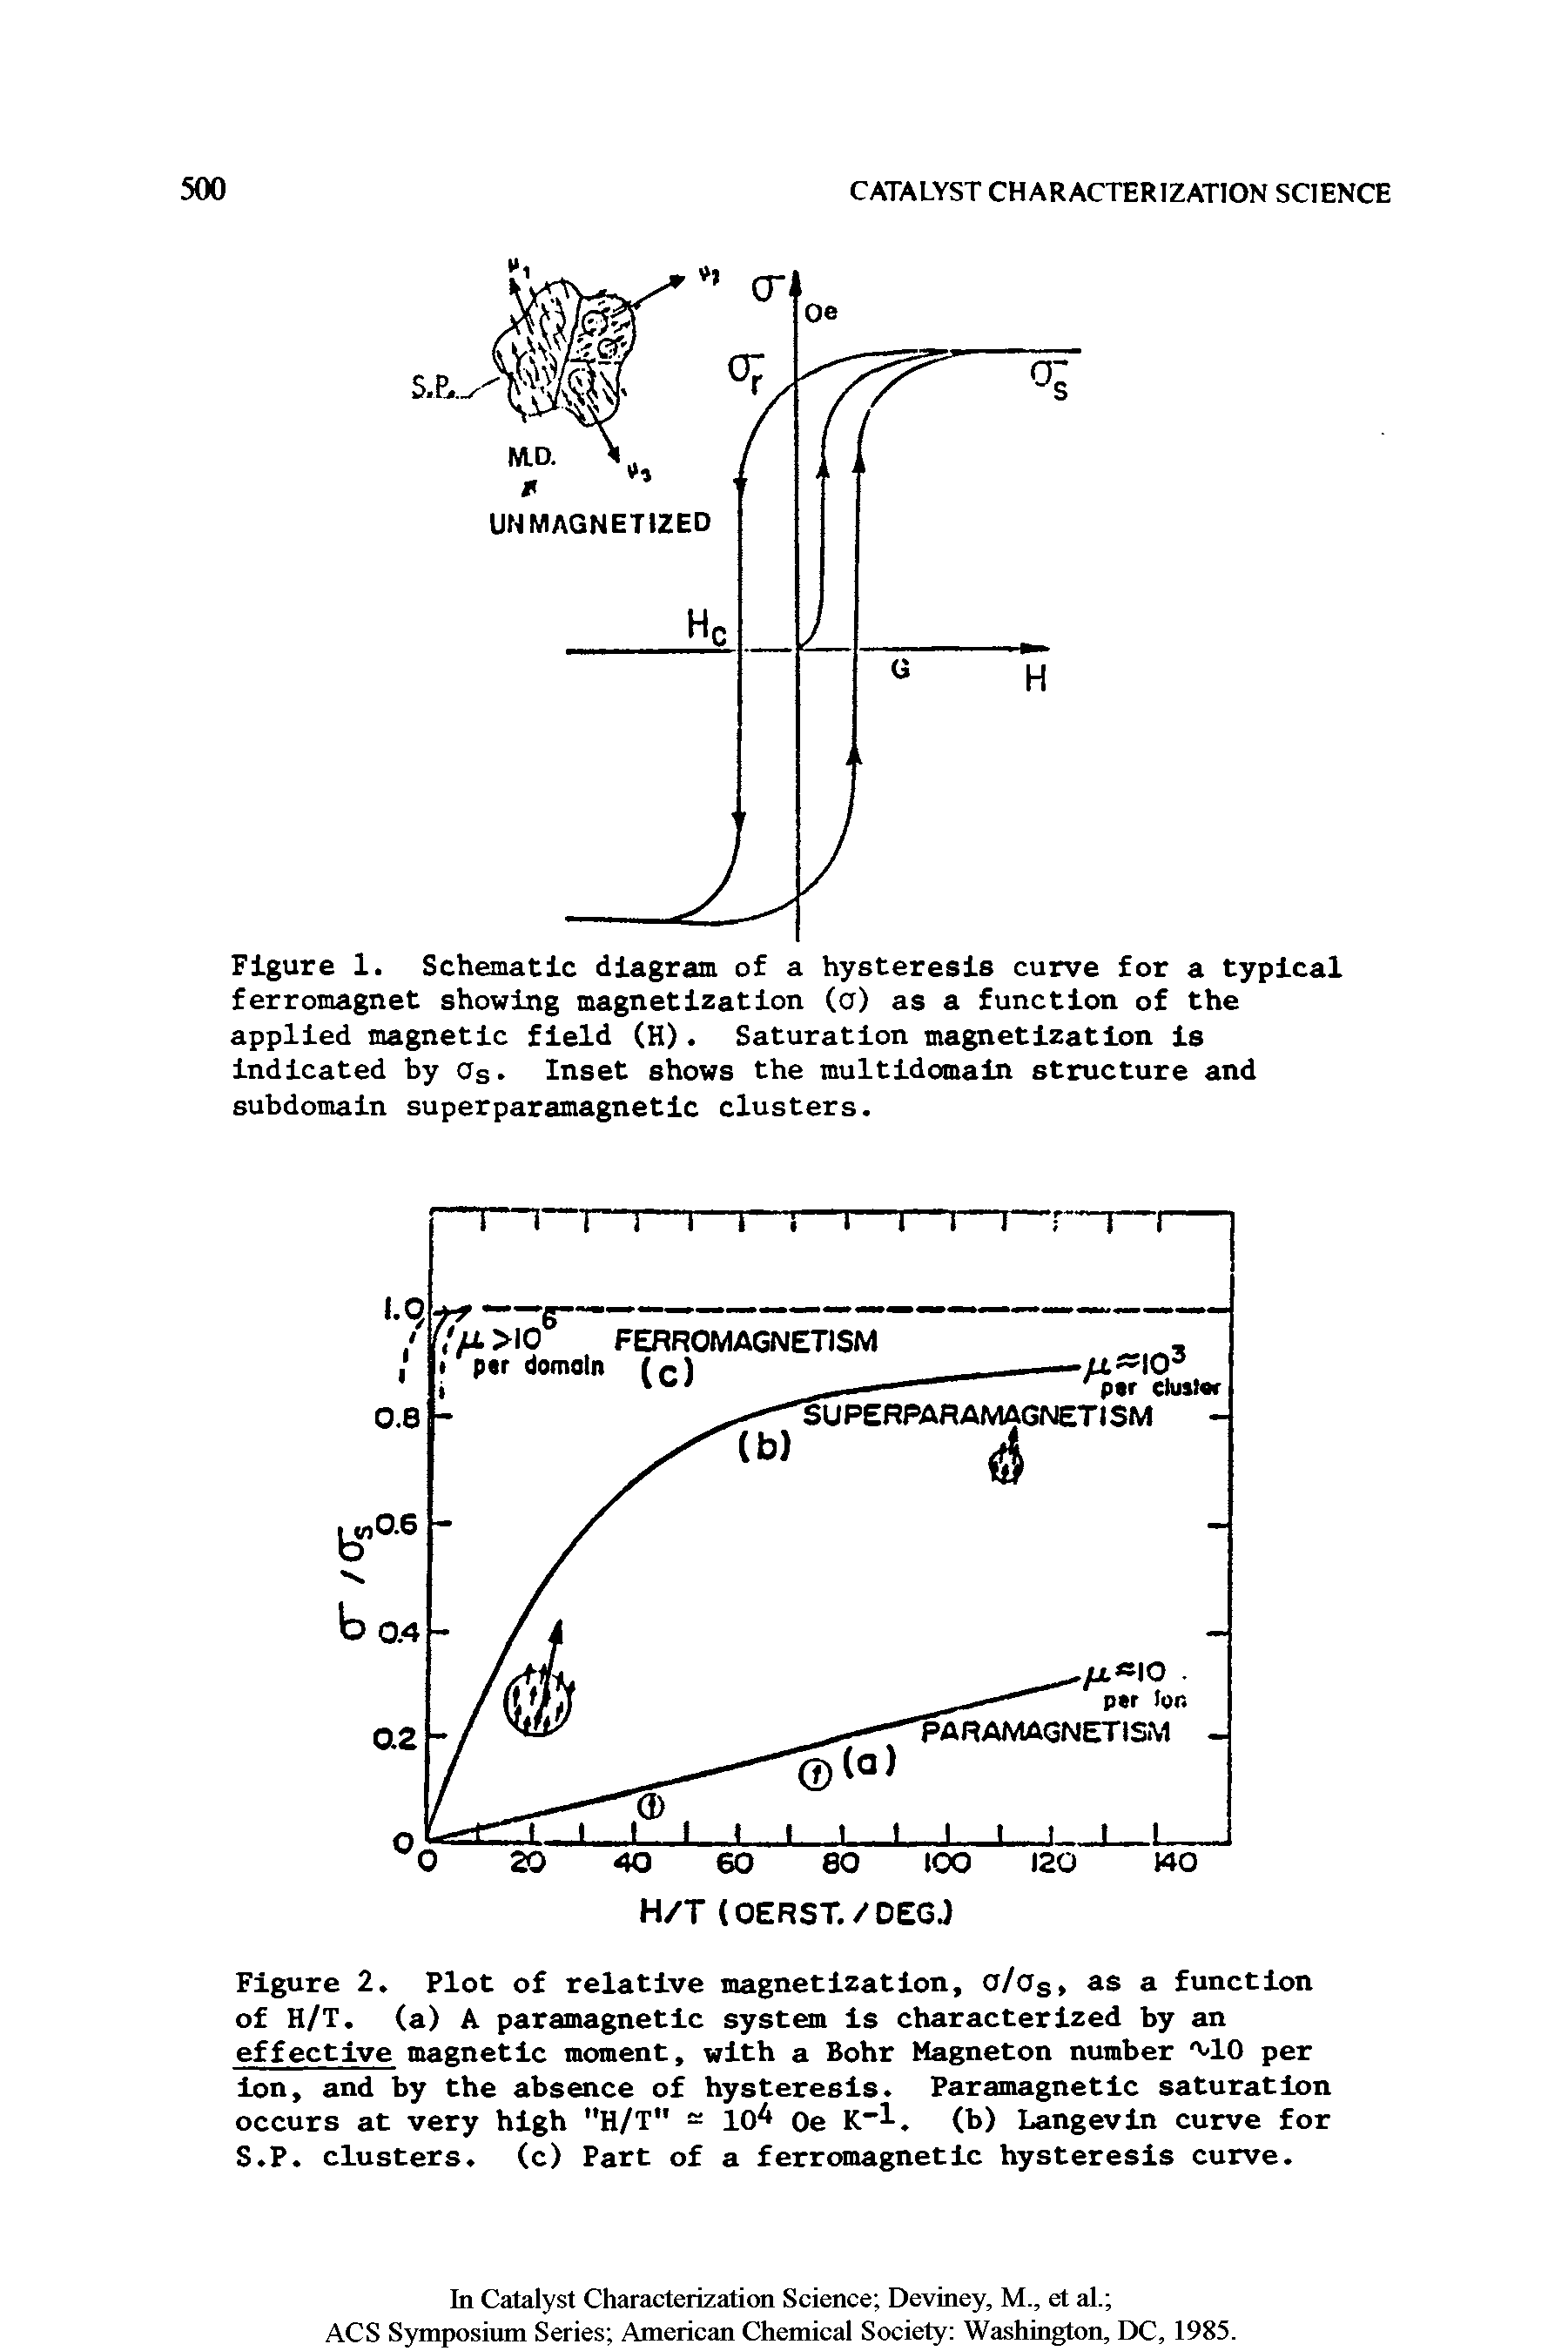 Figure 1. Schematic diagram of a hysteresis curve for a typical ferromagnet showing magnetization (a) as a function of the applied magnetic field (H) Saturation magnetization Is Indicated by Os- Inset shows the multidomain structure and subdomain superparamagnetlc clusters.